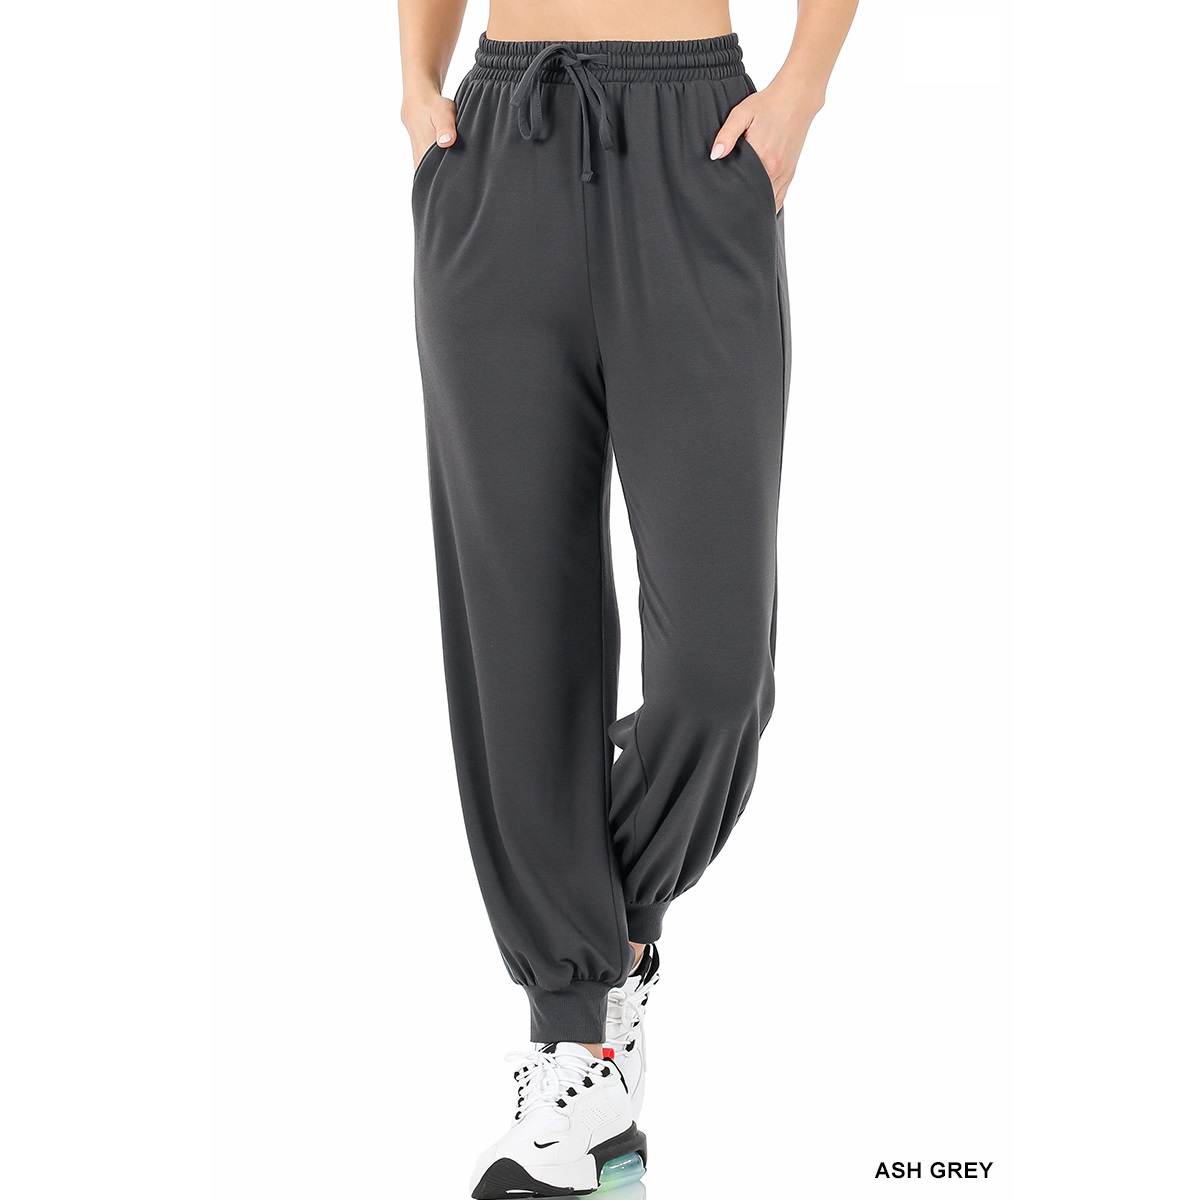 Soft French Terry Joggers - Relaxed Fit Side pockets, elastic waist, draw cord and cuffed legs